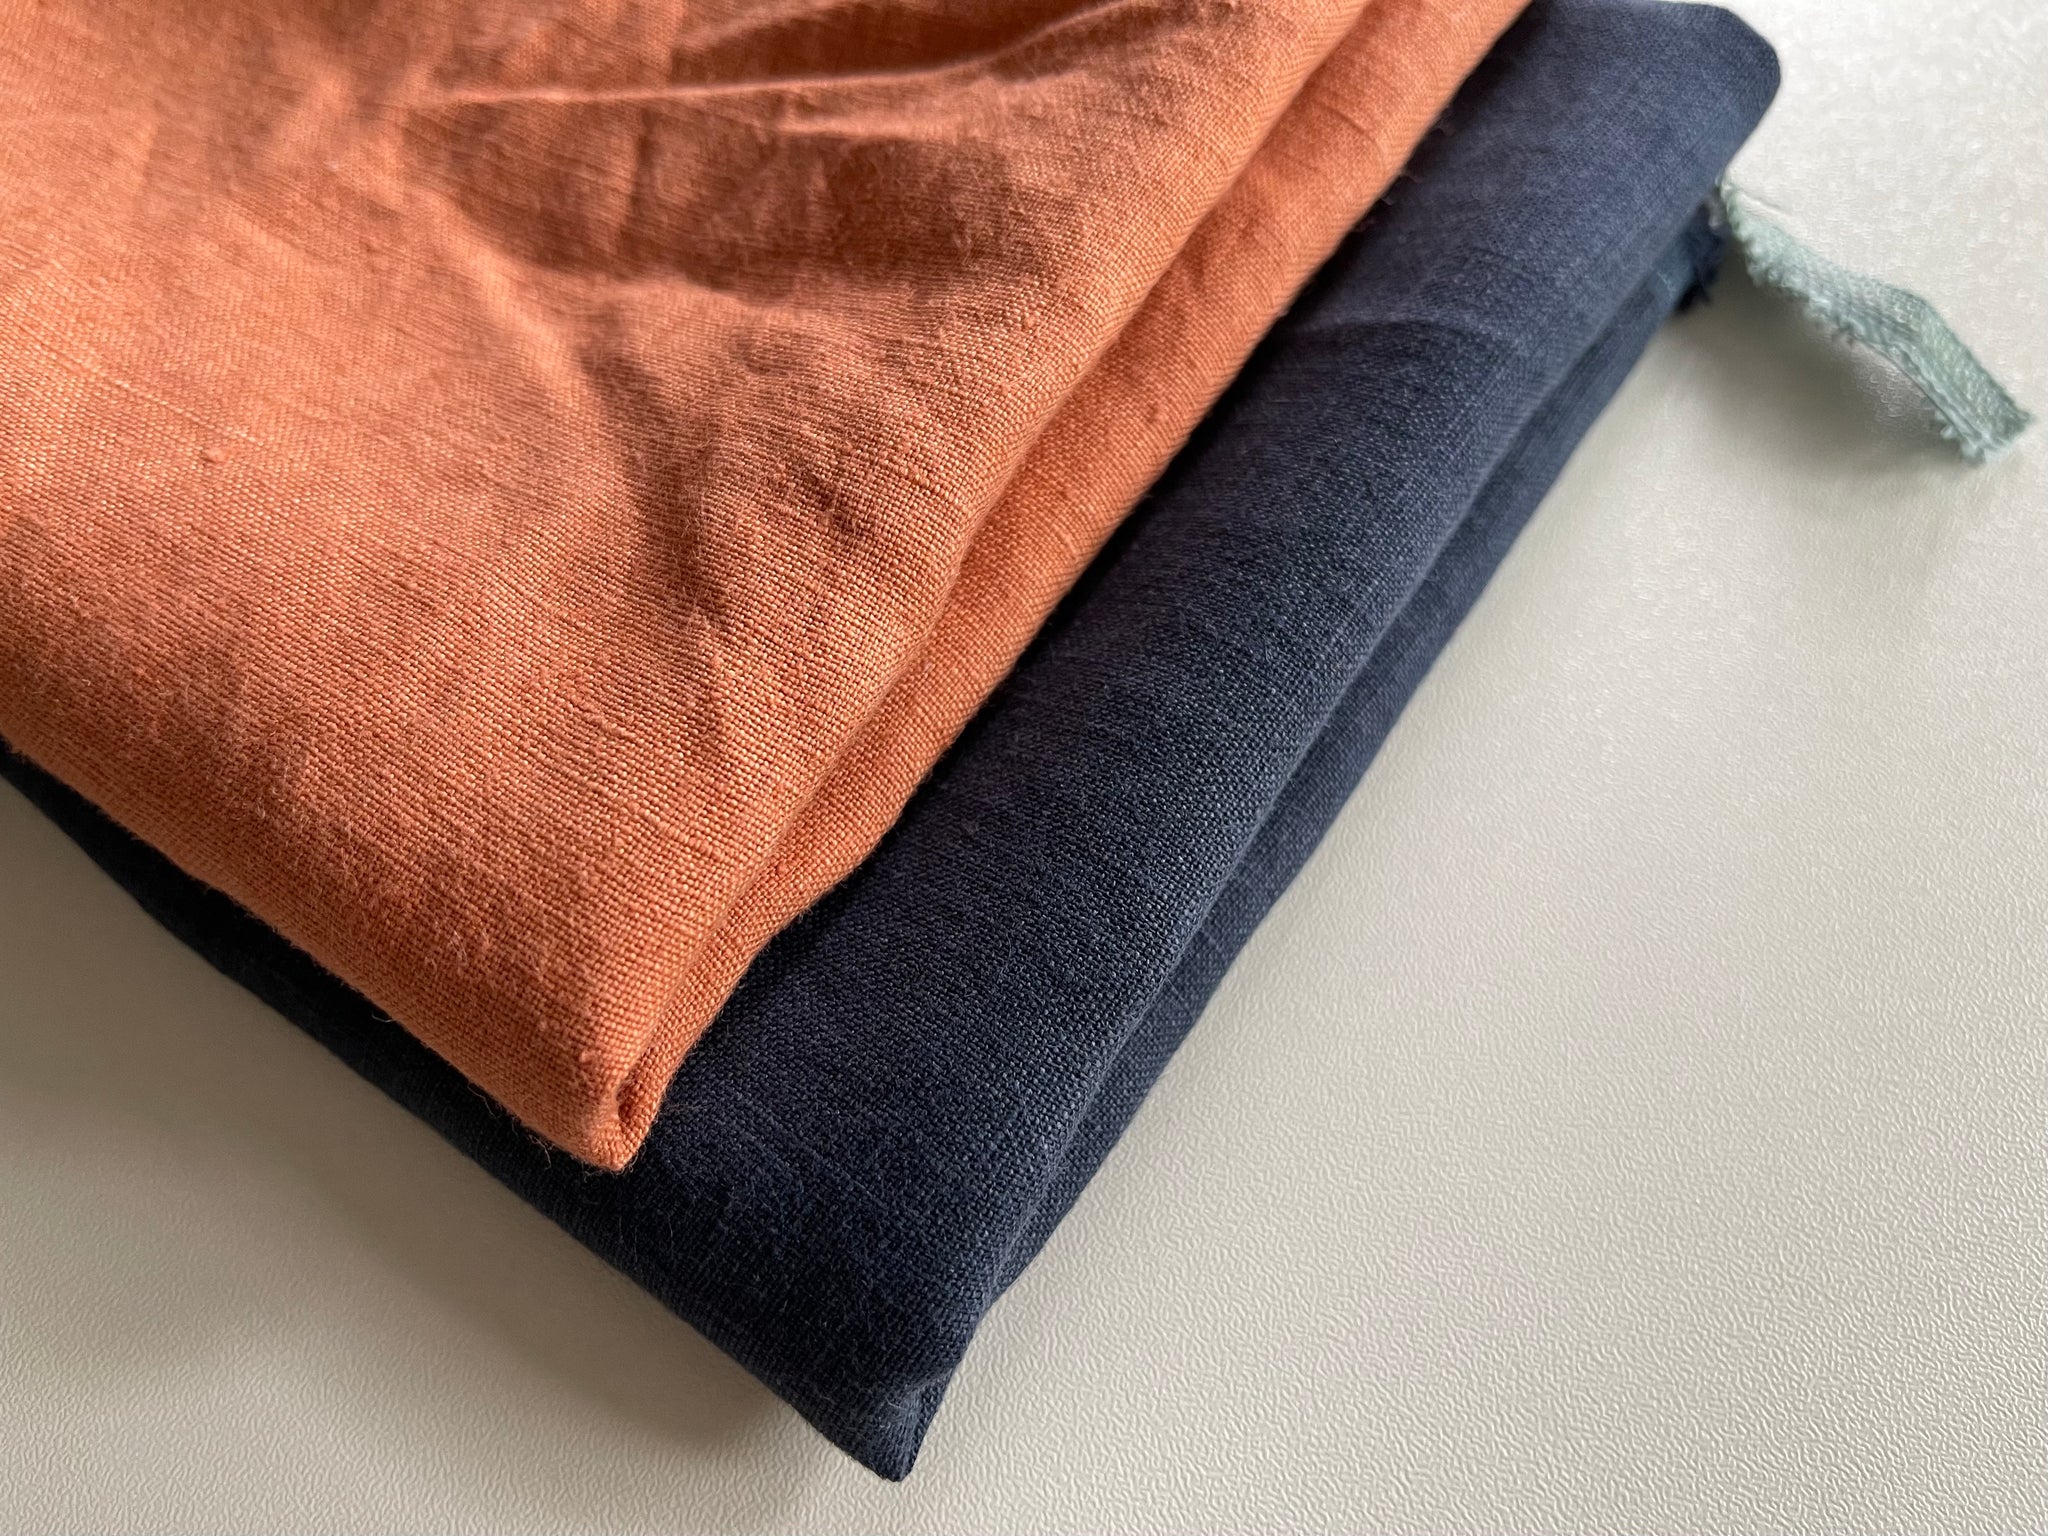 Linen Fabric Remnants - Terracotta and Navy Blue